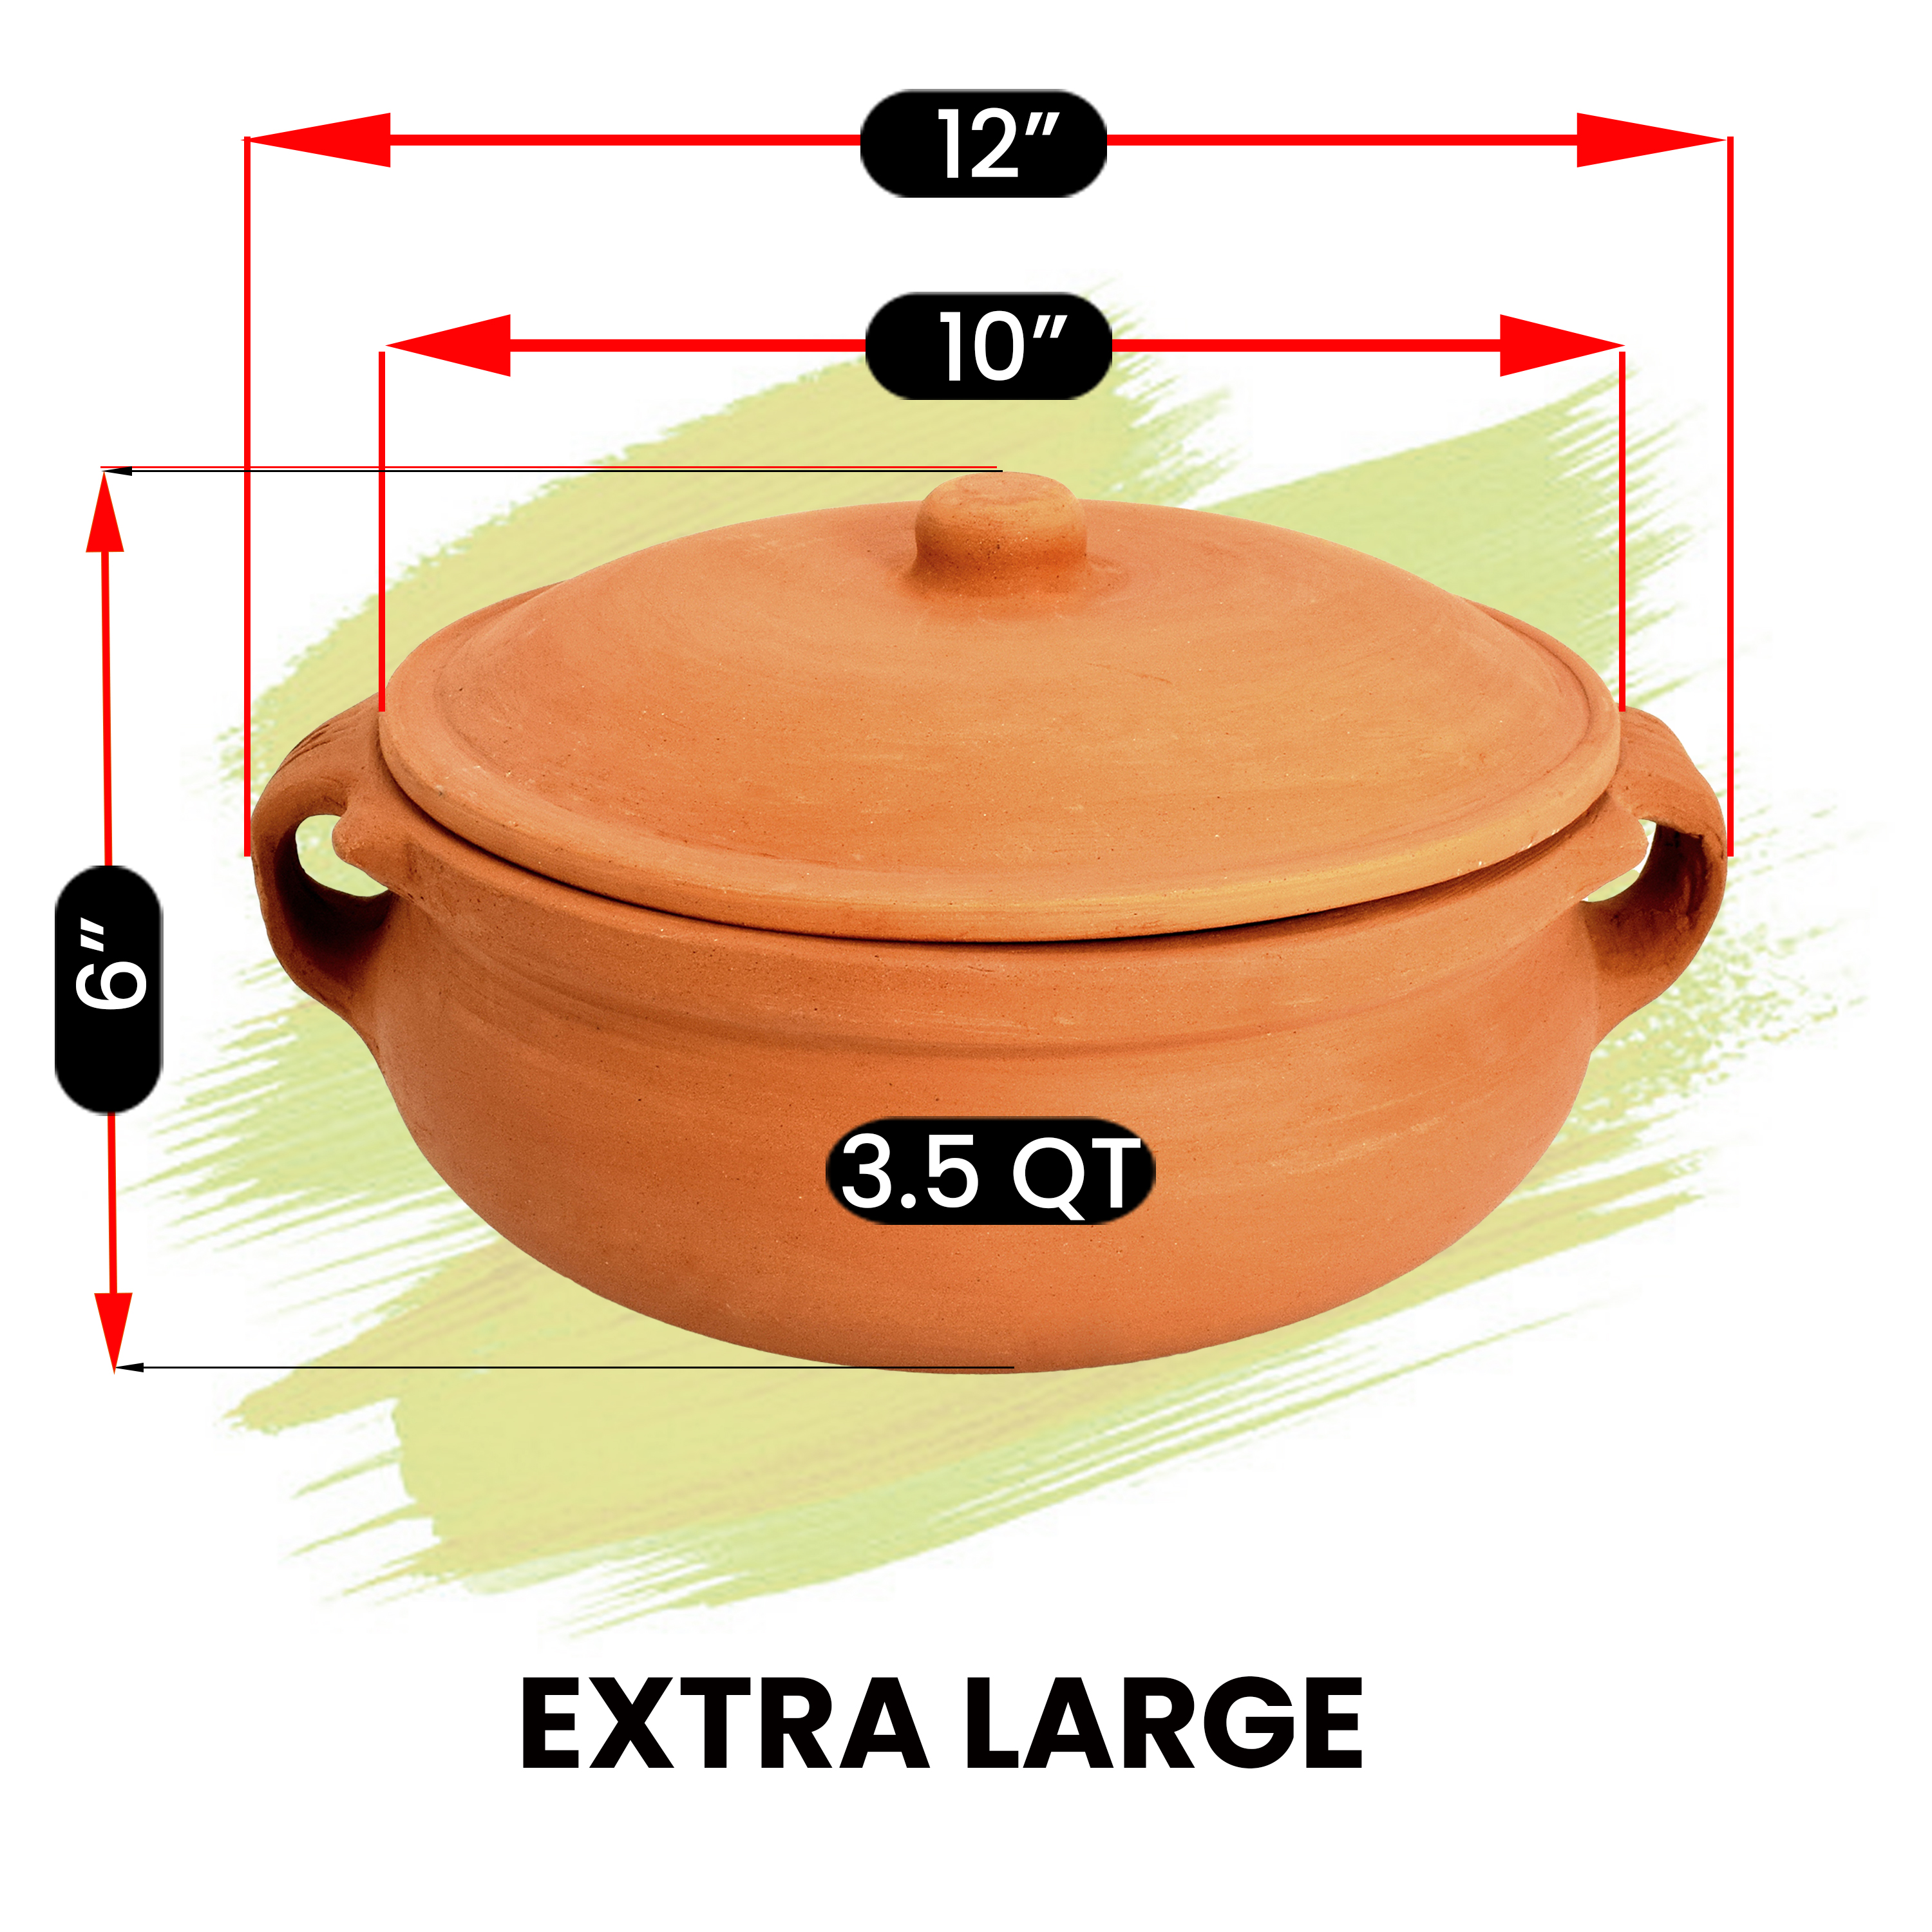 https://ancientcookware.com/images/stories/virtuemart/product/ind_2094_10_Large_with_measurements6.jpg